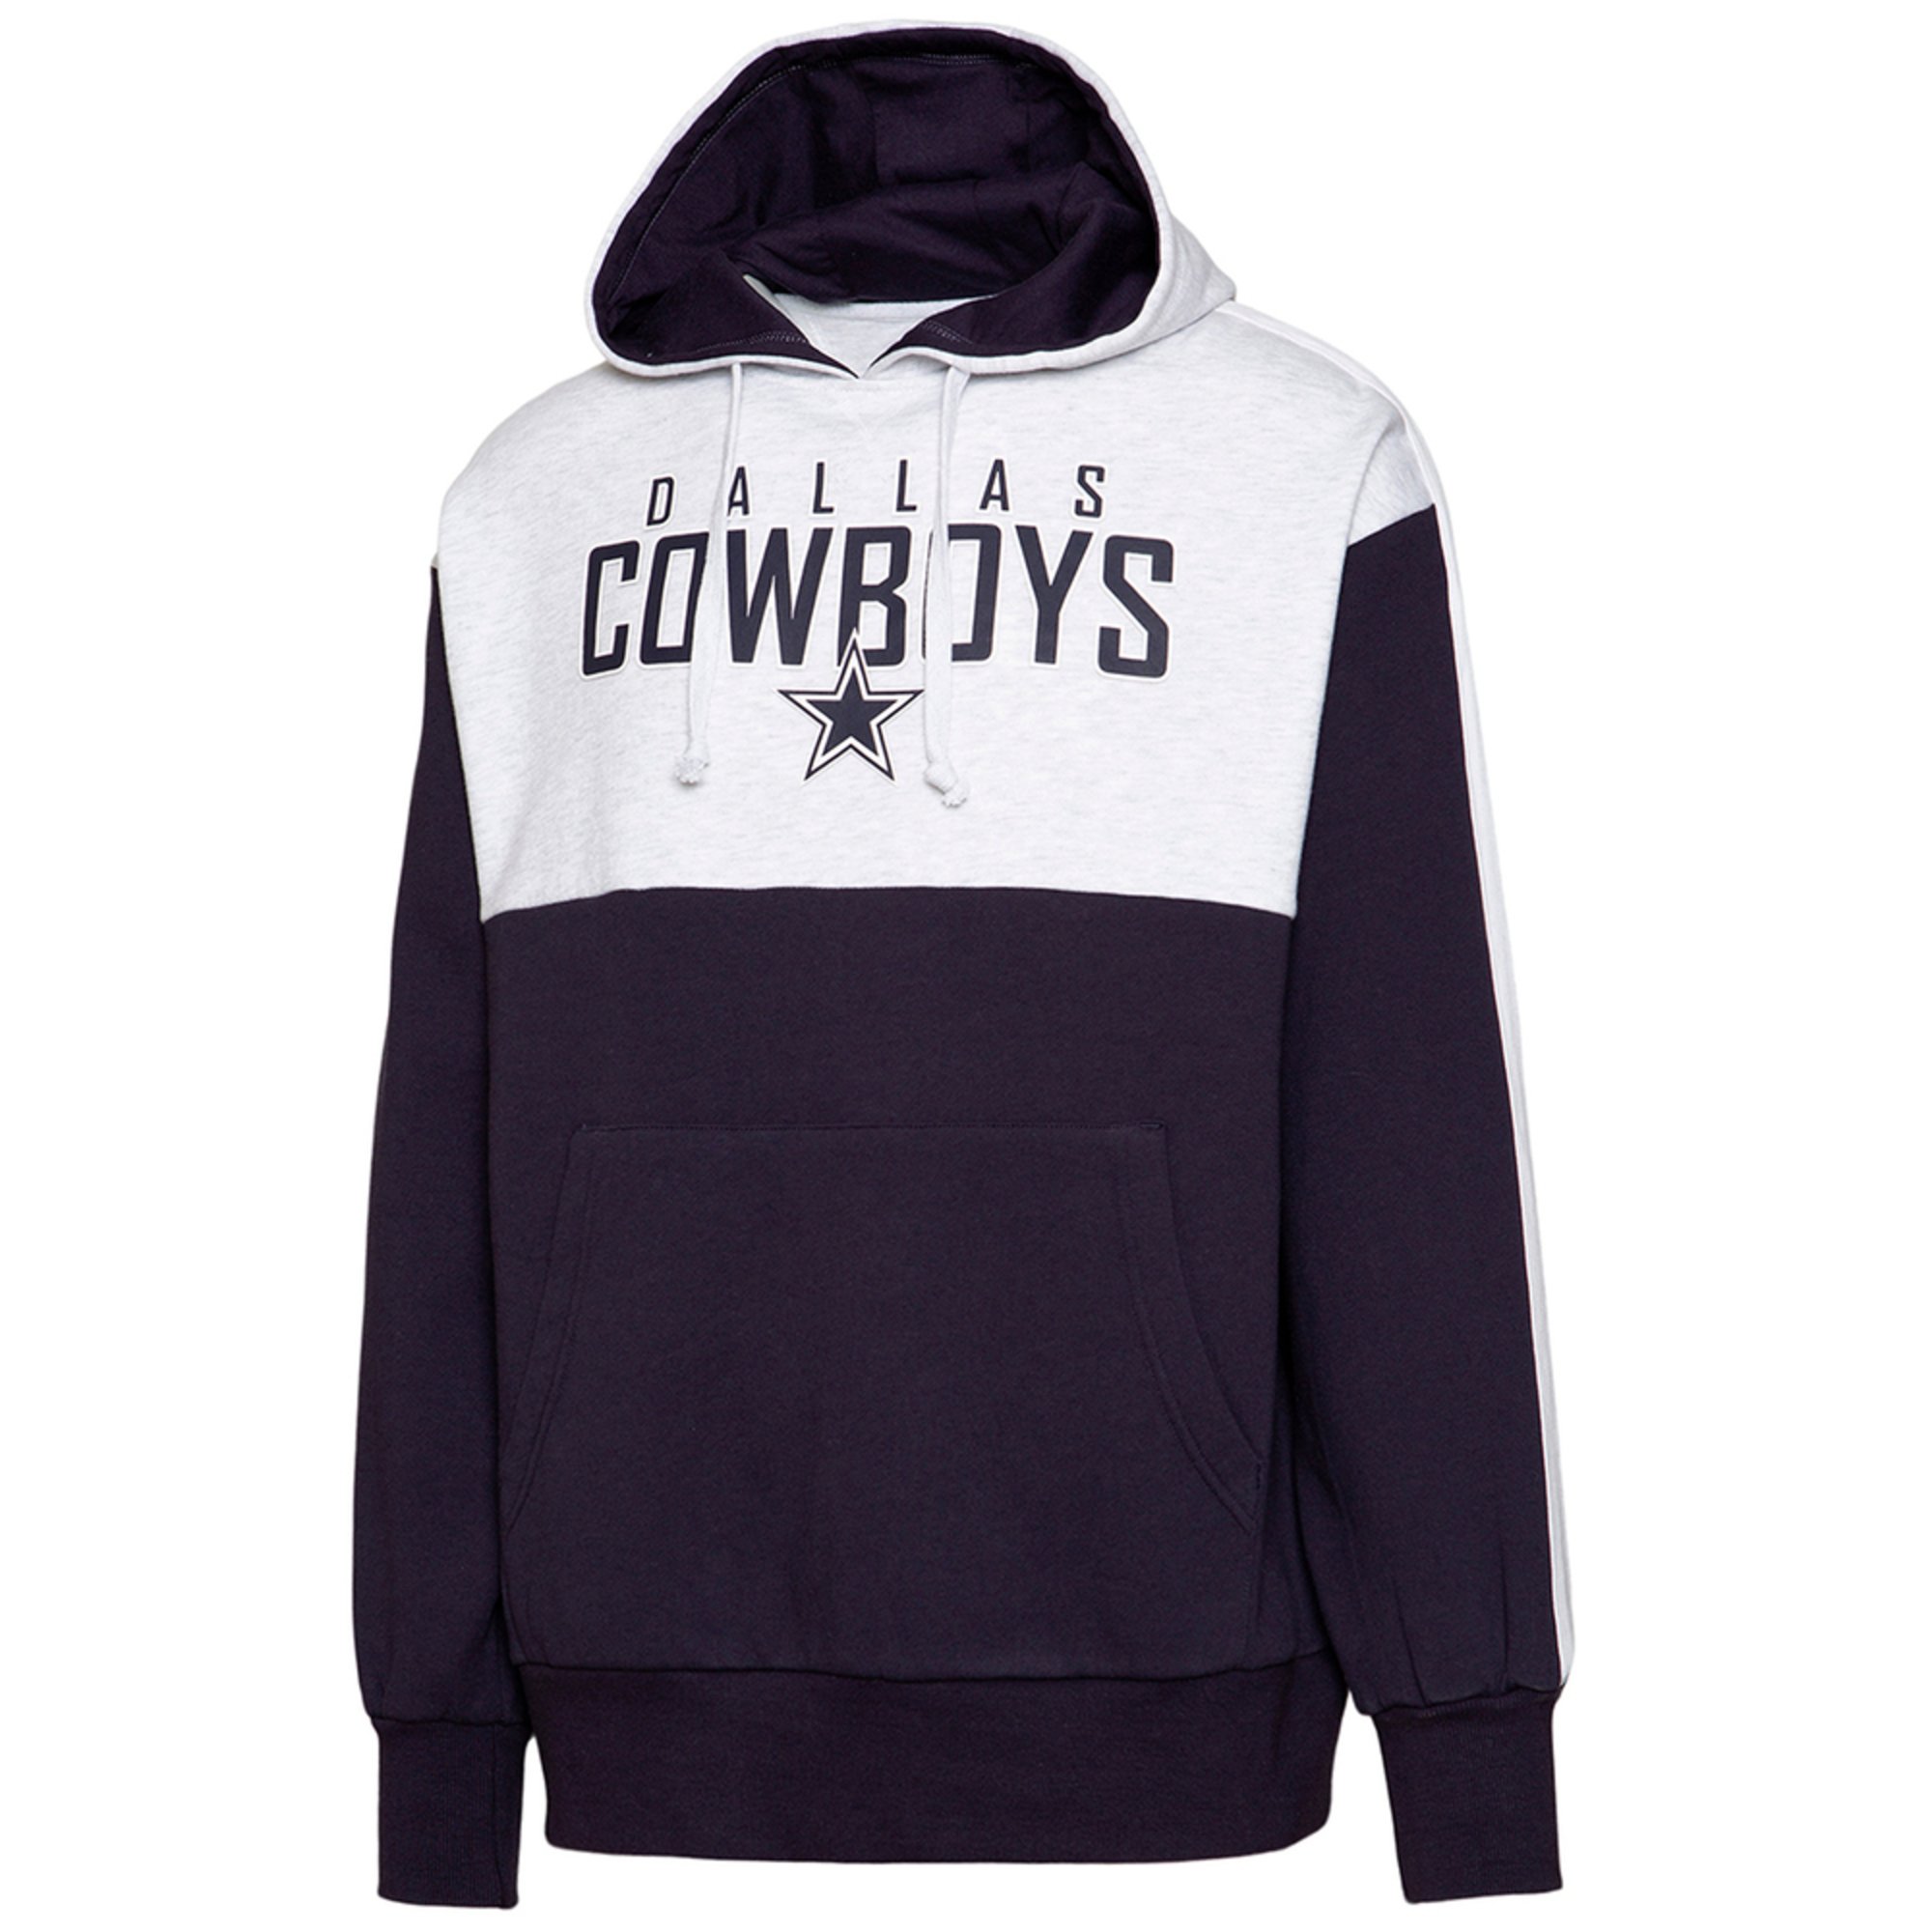 official cowboys nfl store